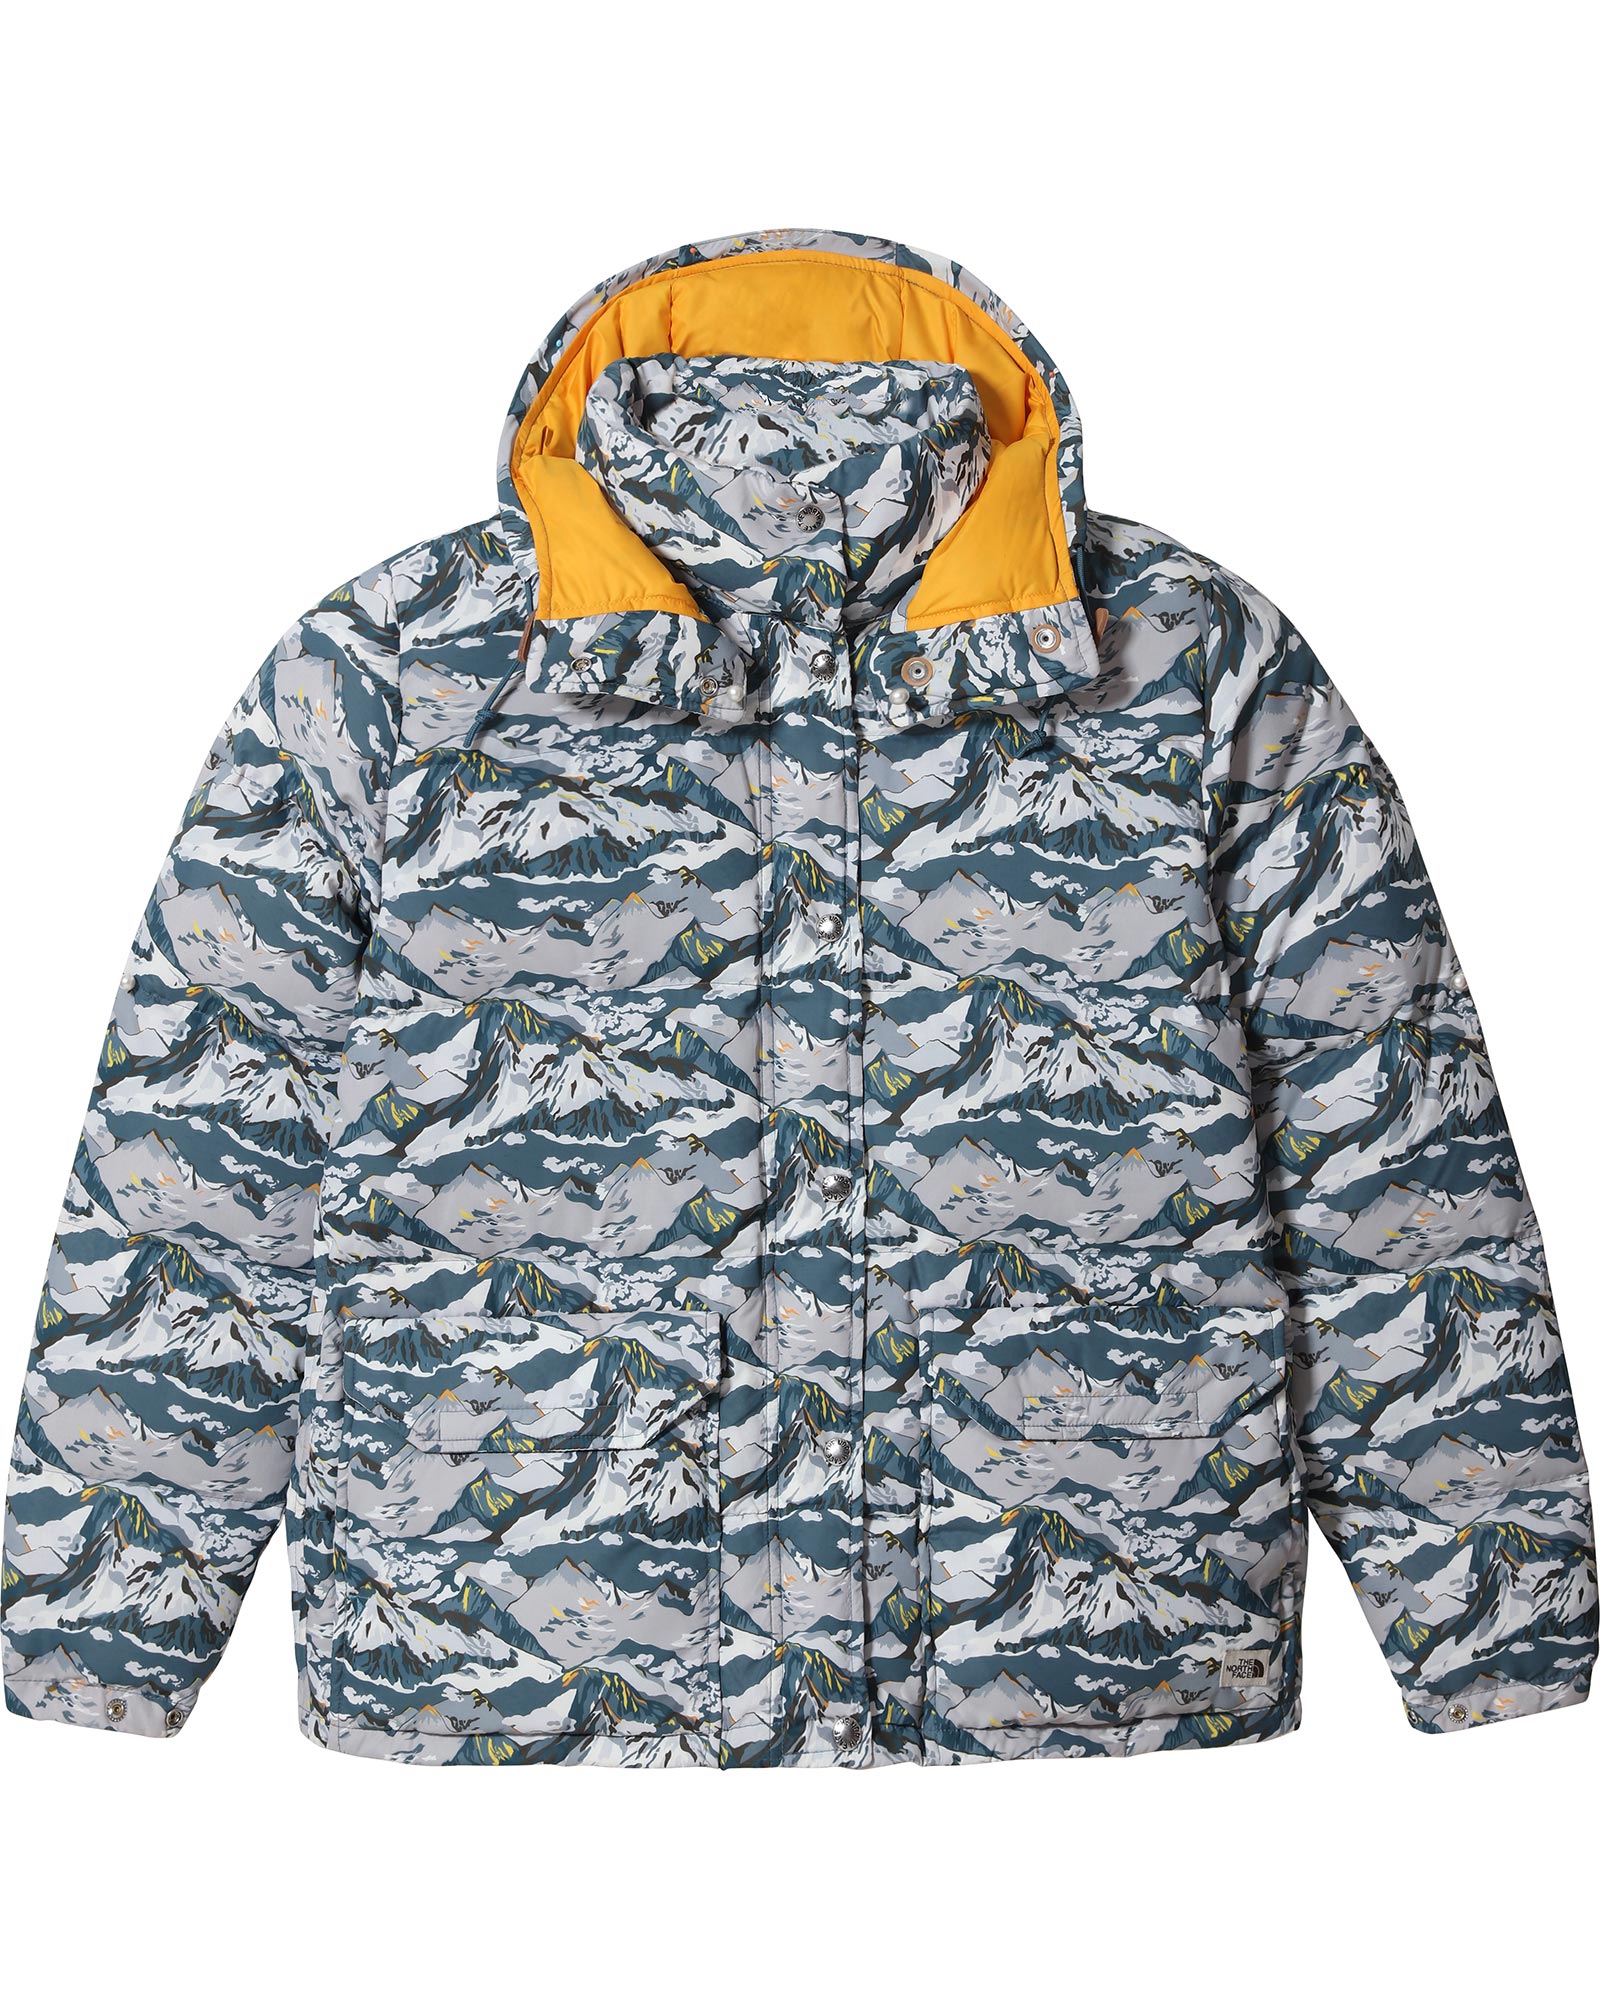 The North Face Liberty Sierra Women’s Down Jacket - Liberty Print S